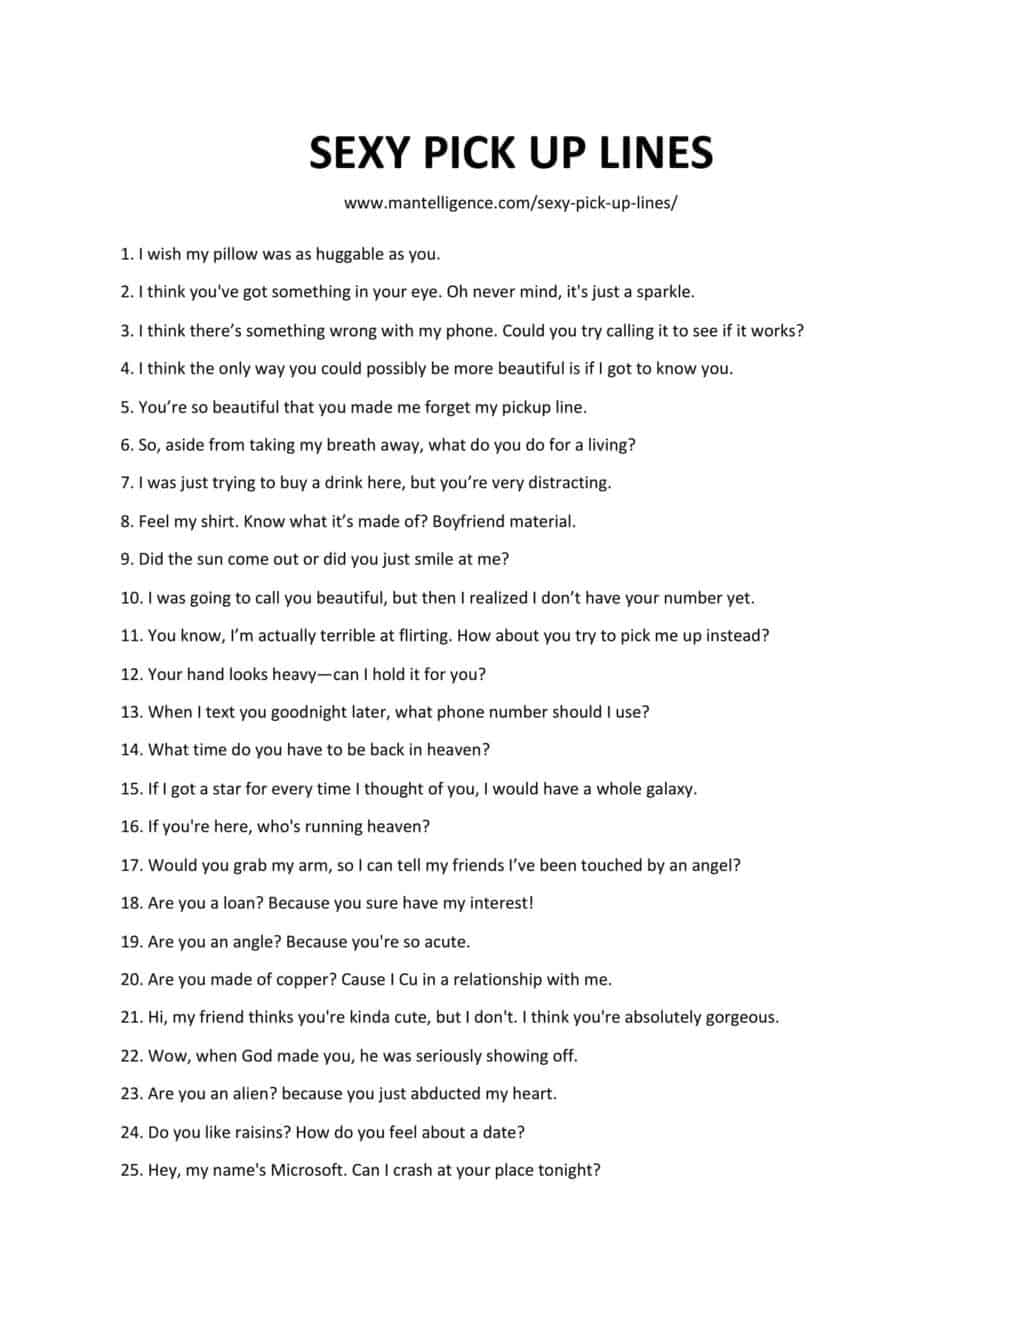 Over pick text lines up 58 Dirty